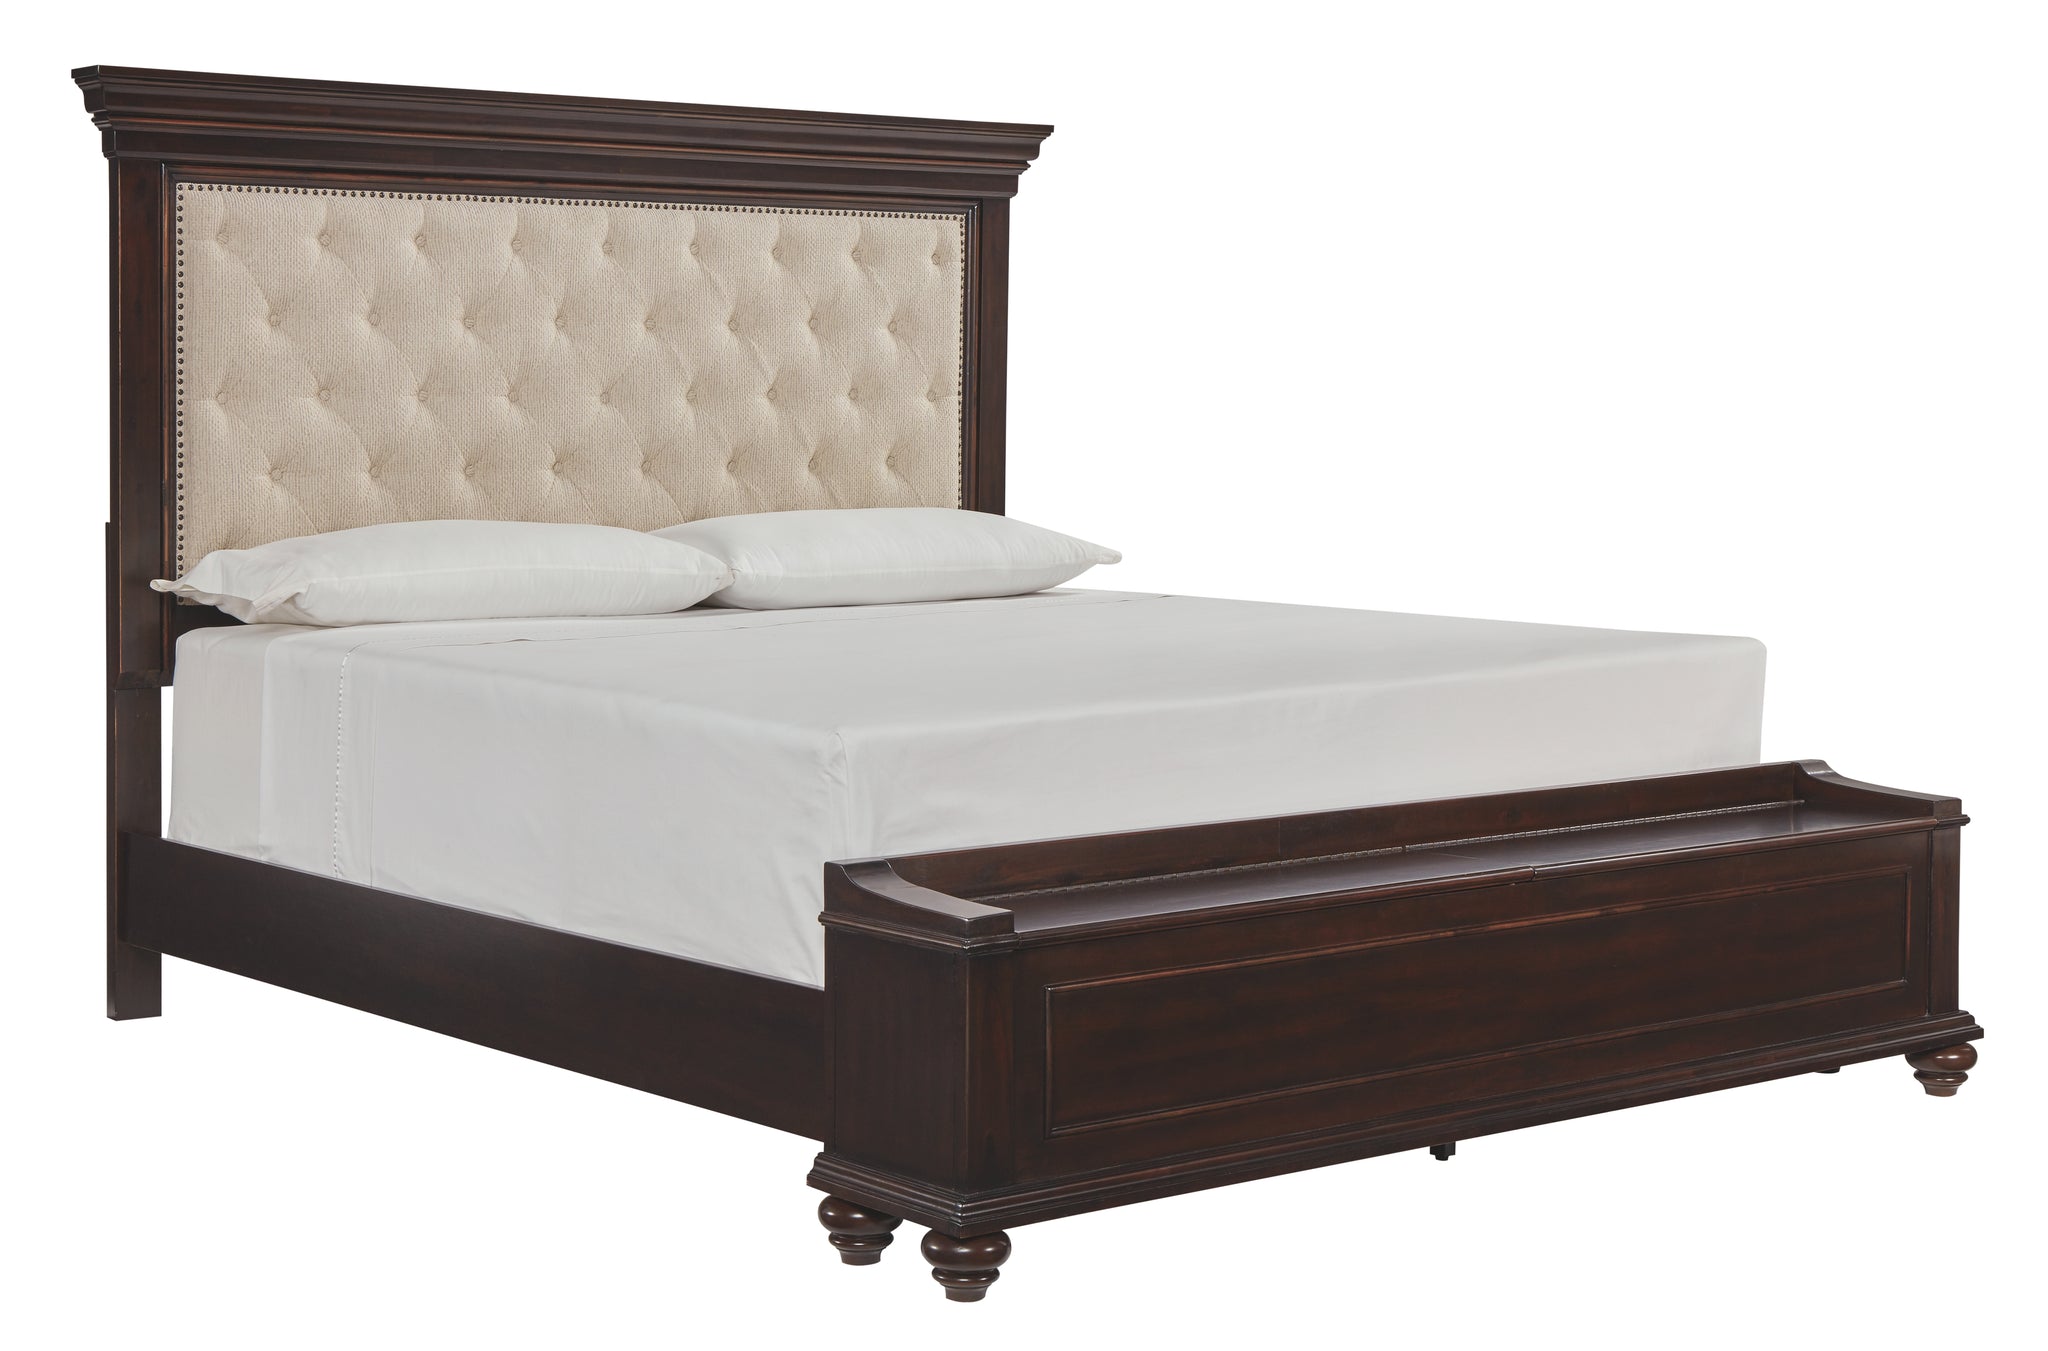 Signature Design by Ashley Brynhurst Queen Upholstered Bed with Storage Bench